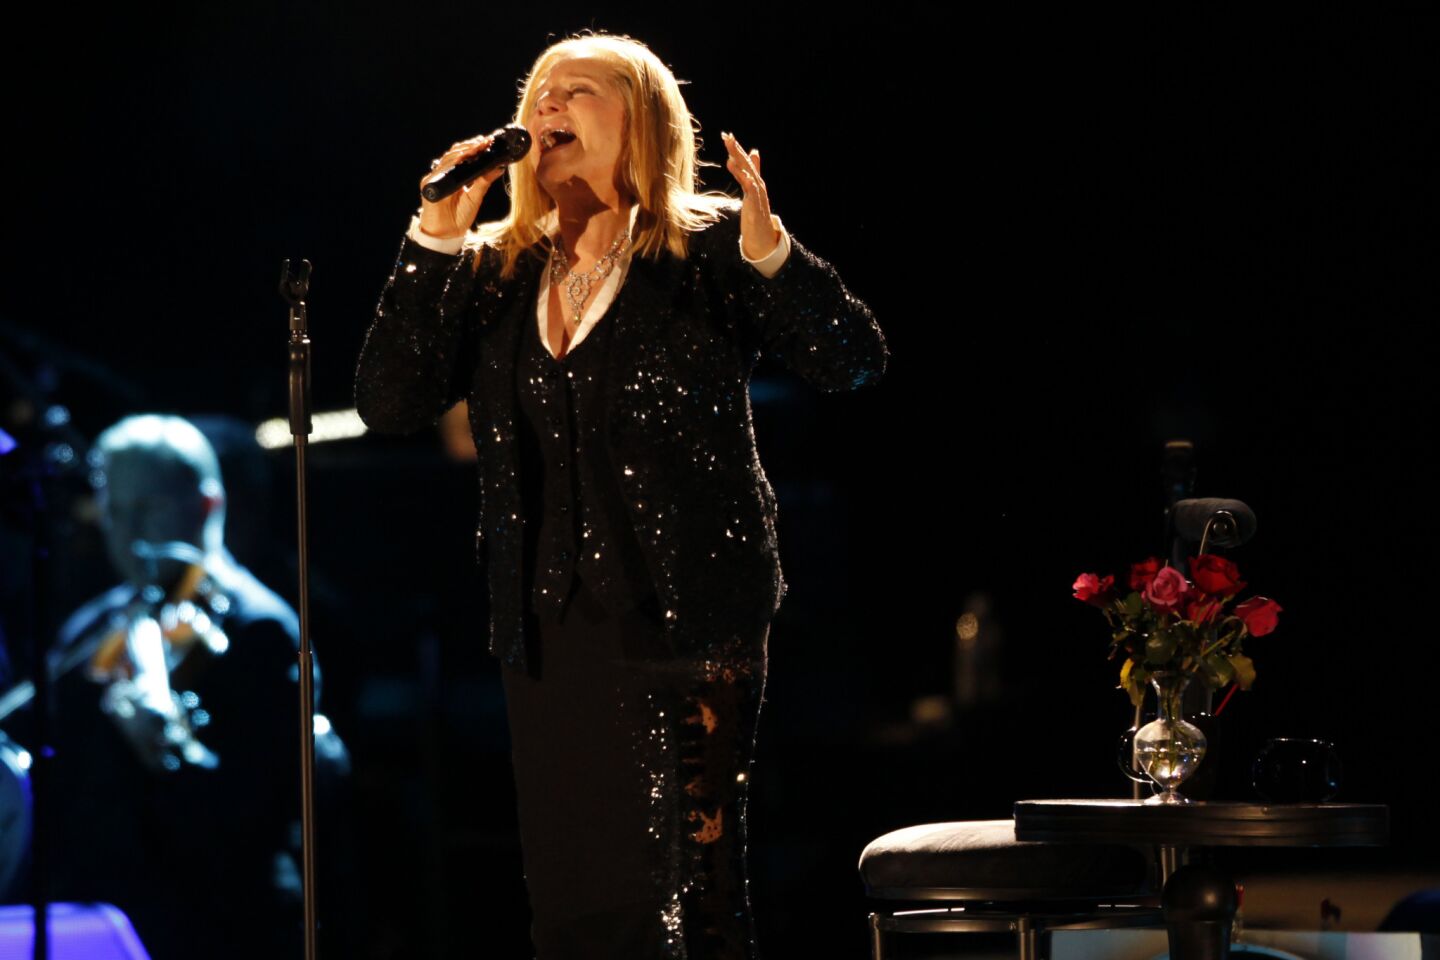 Arts and culture in pictures by The Times | Barbra Streisand at the Bowl